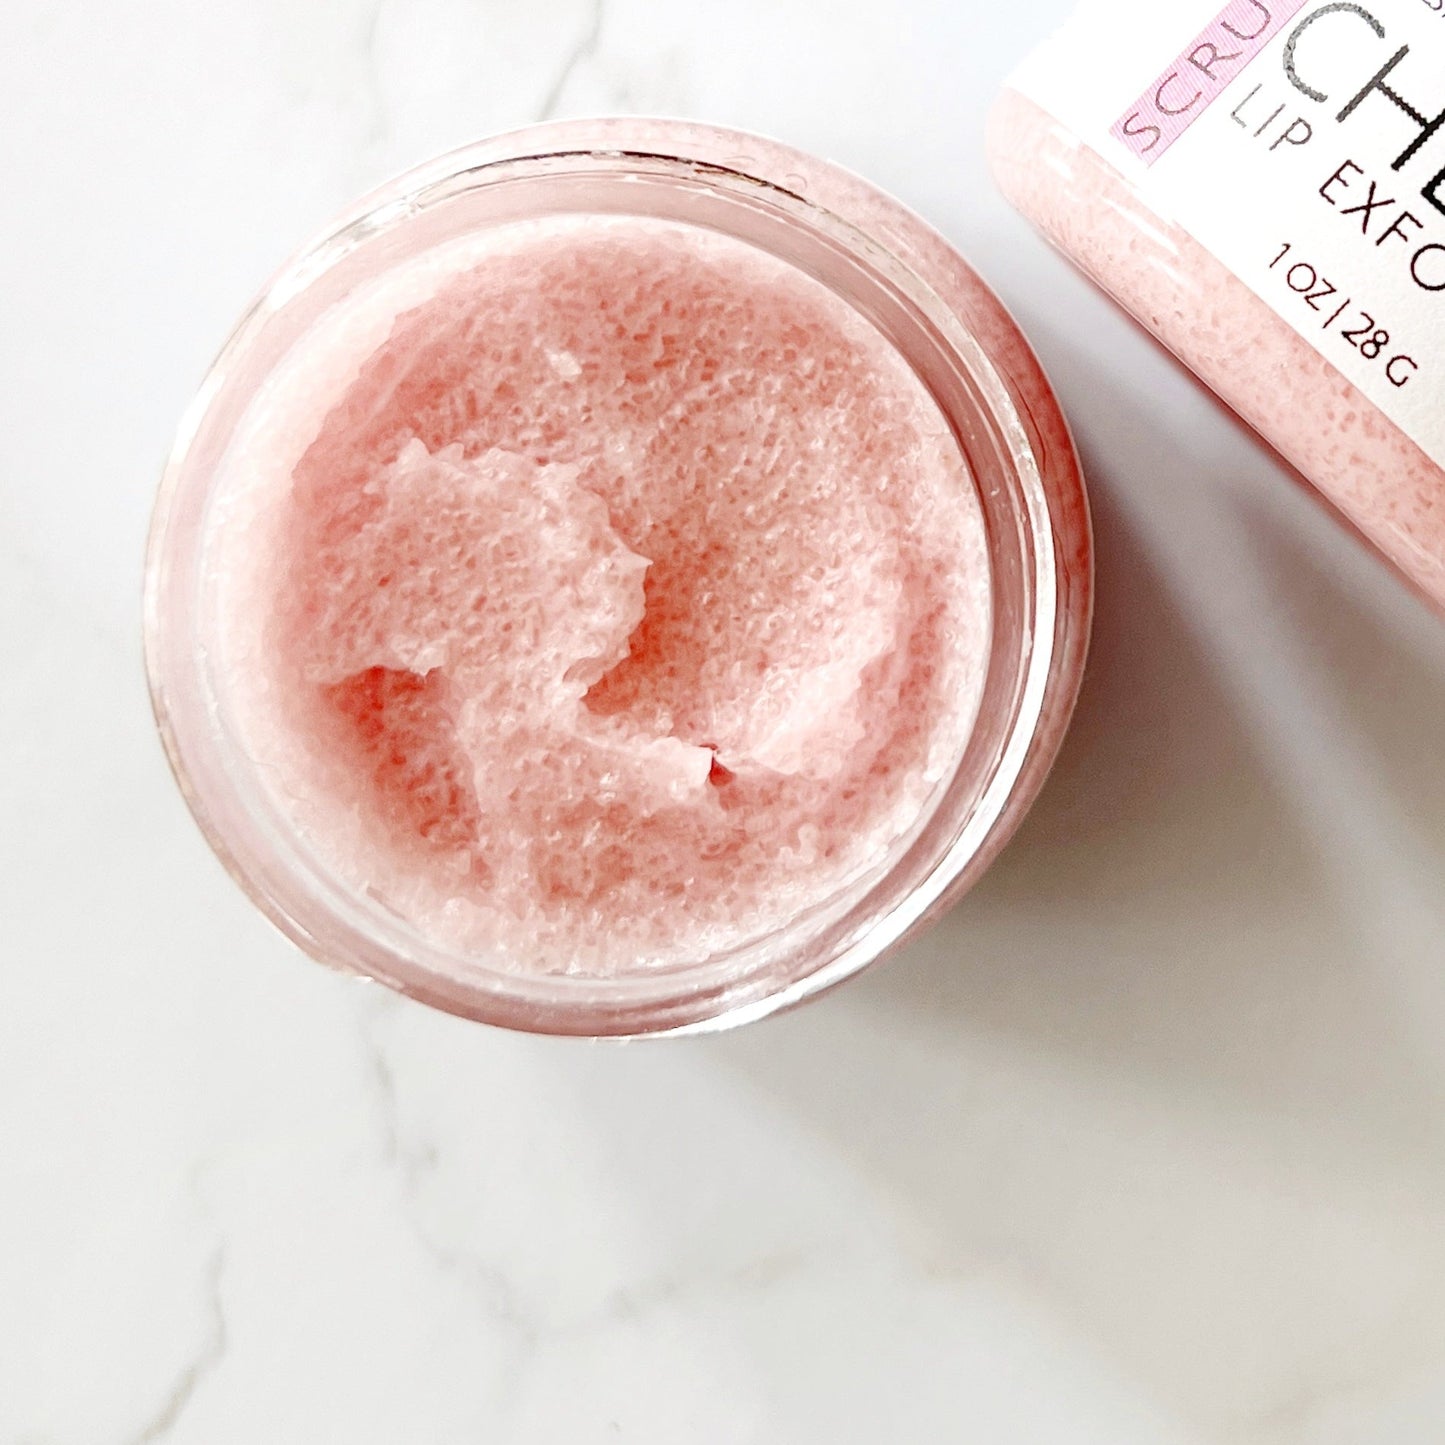 lip care with cherry lib scrub and exfoliant handcrafted by Lather + Soul